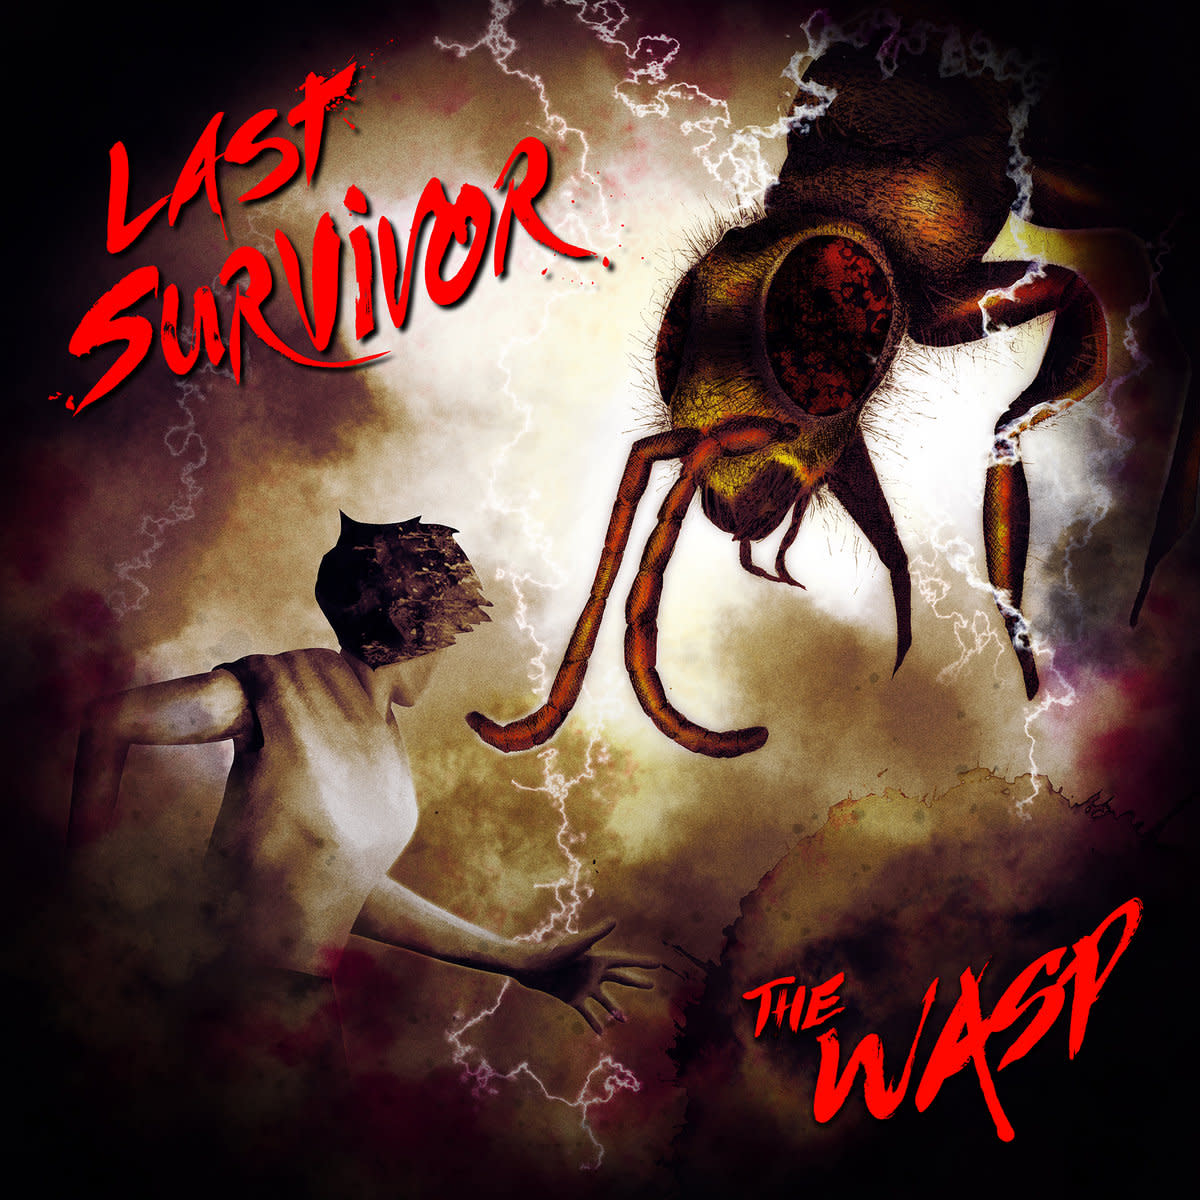 synth-single-review-the-wasp-by-last-survivor